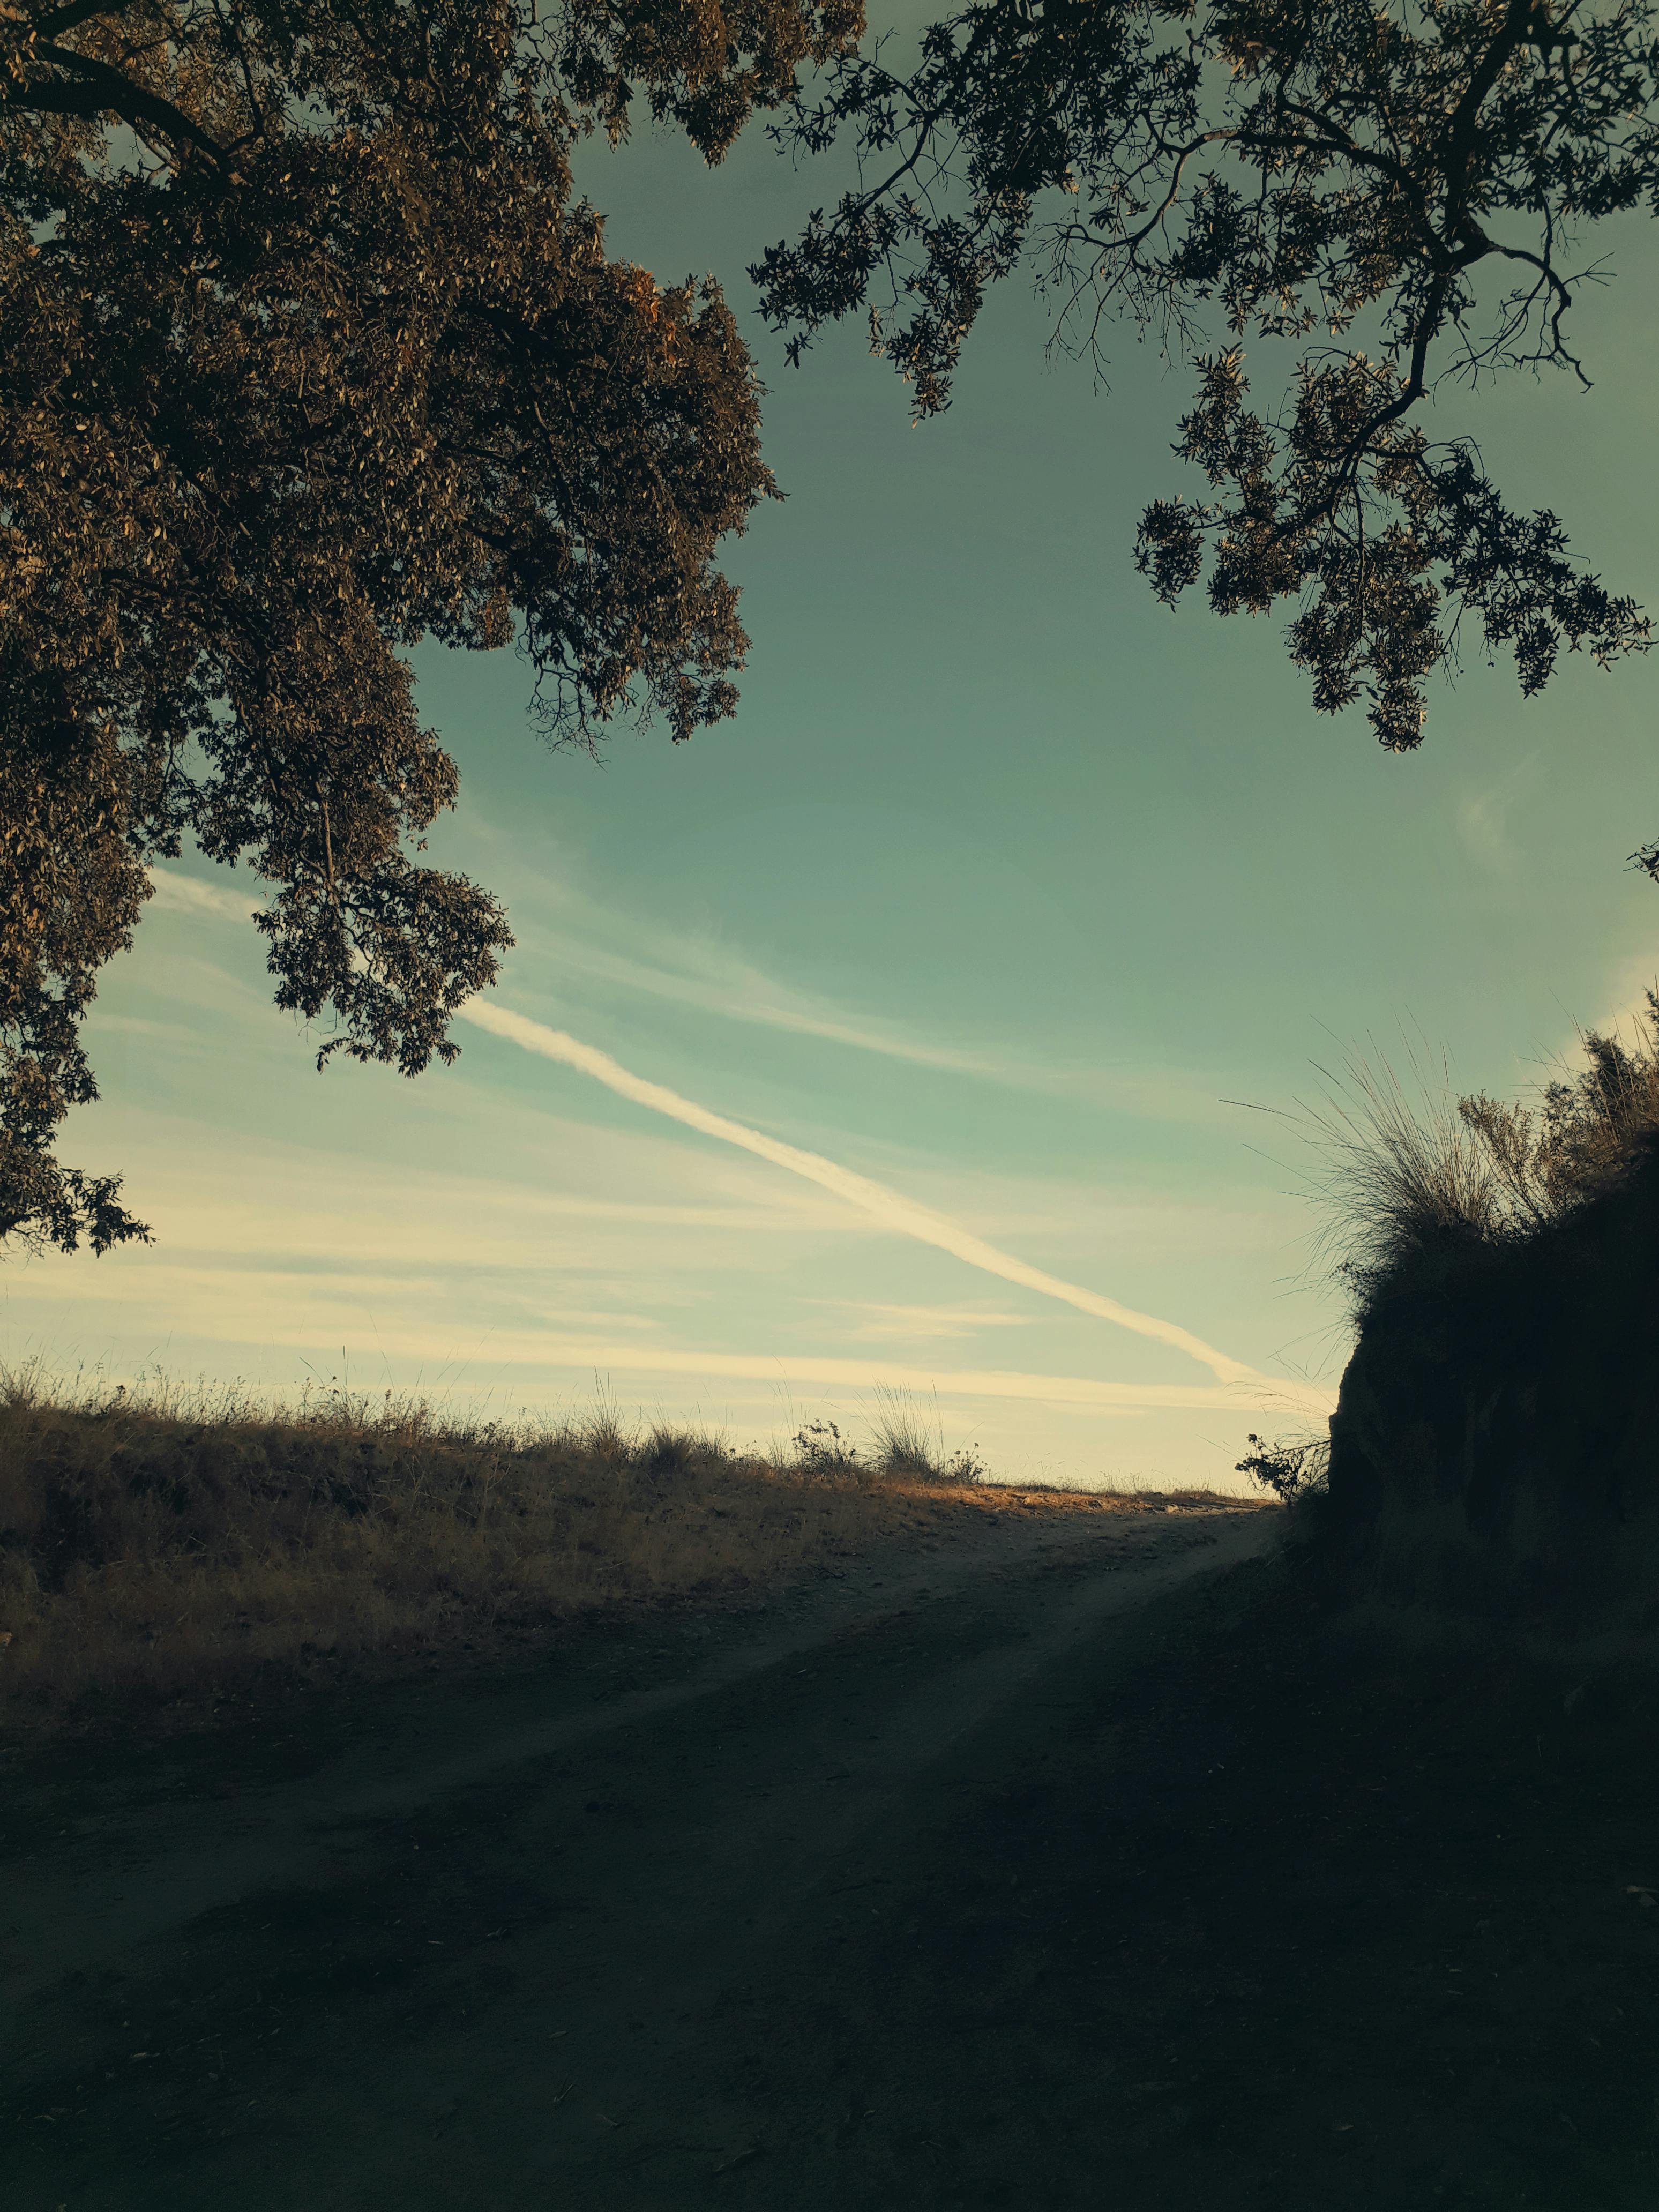 Free stock photo of contrails, dirt road, outdoor